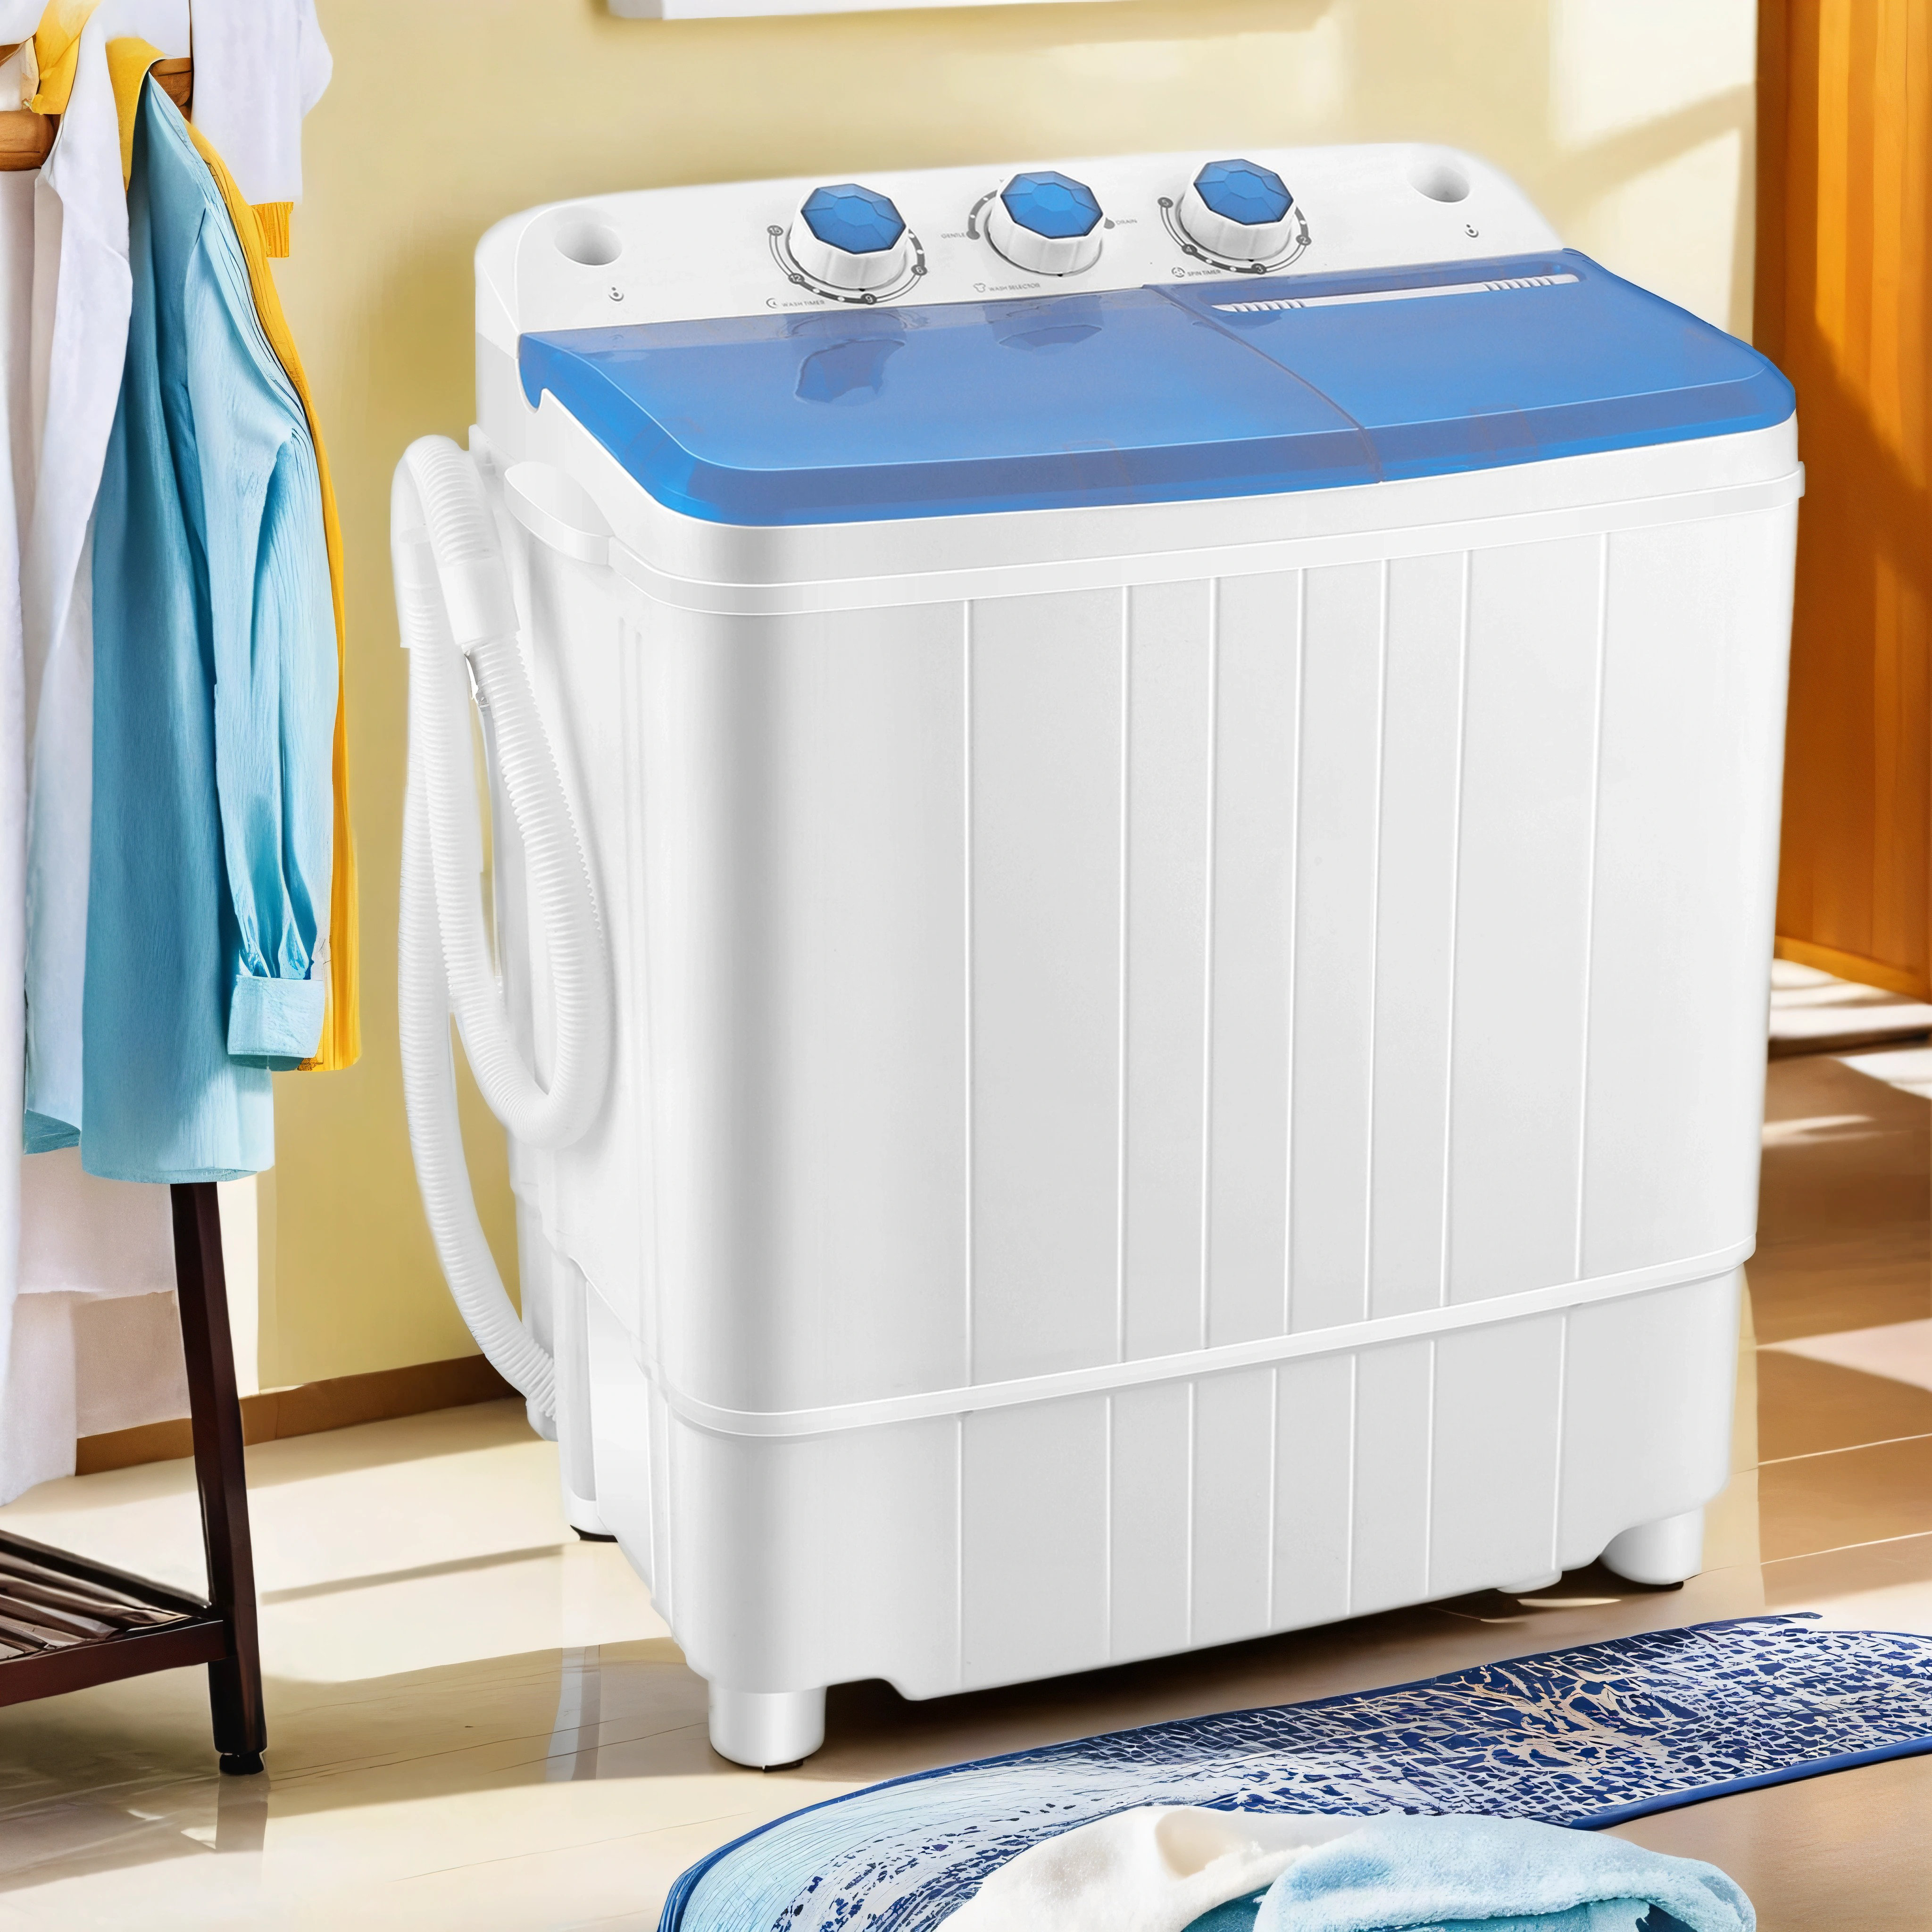 Dalxo 2.33 cu.ft Capacity High Efficiency Portable Washer & Dryer Combo